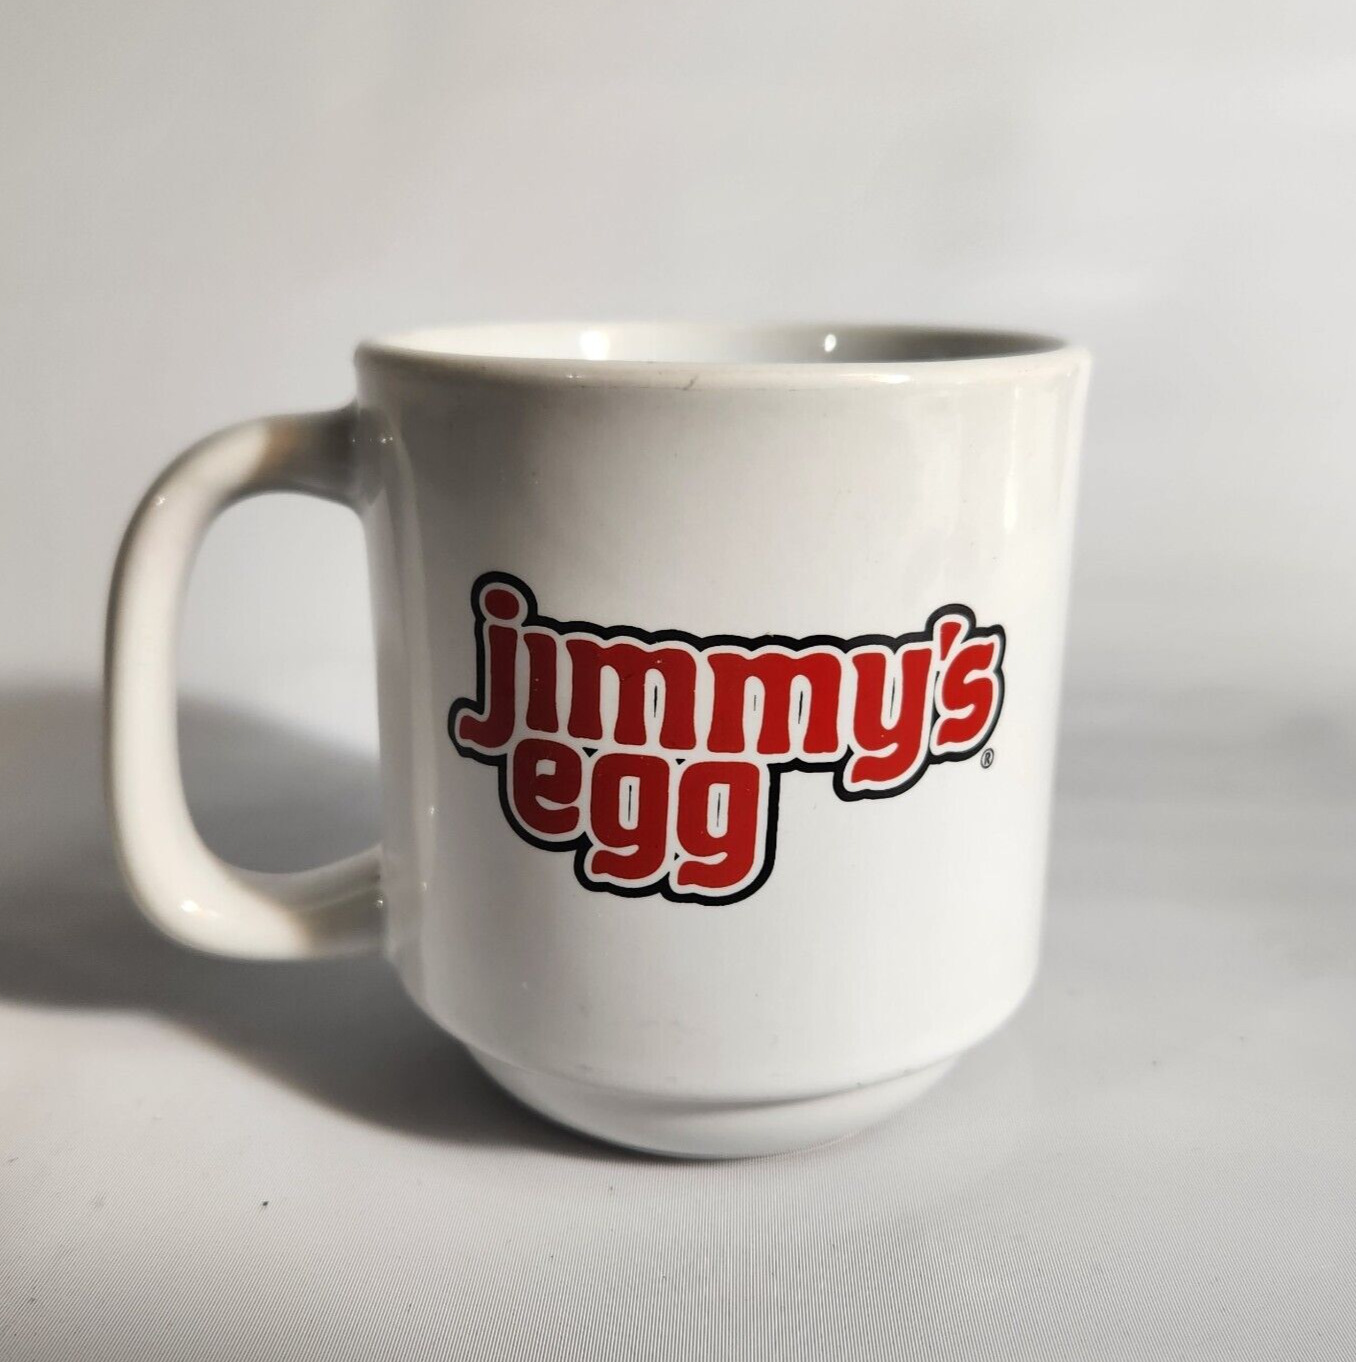 Vintage Jimmy’s Egg Ceramic Coffee Cup 11 oz Crestware Mug Red Spell Out